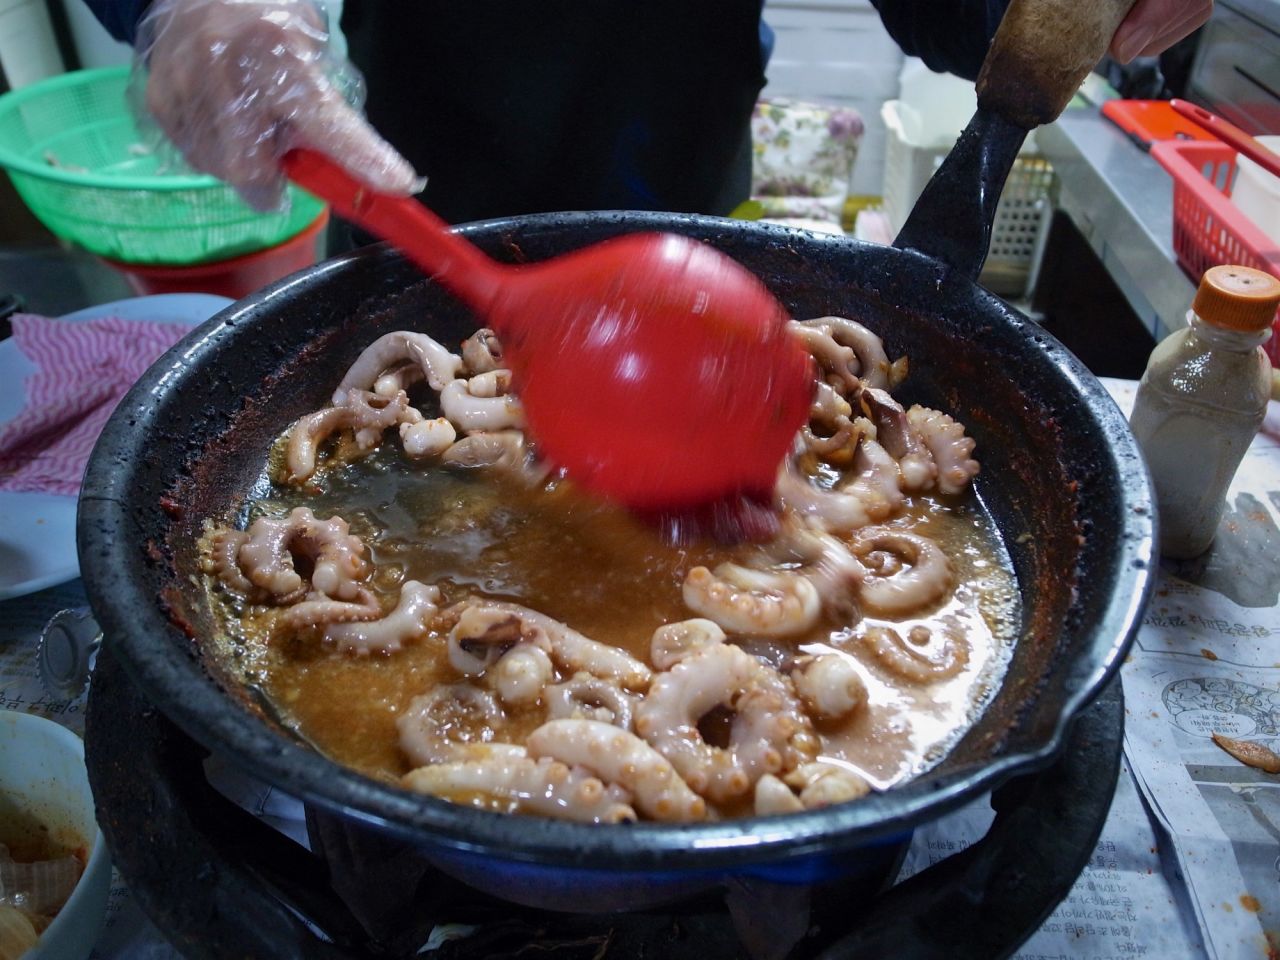 <strong>Nakji bokkeum, Seoul: </strong>In Seoul, Holliday  suggests nakji bokkeum -- a  stir-fried octopus dish. It's one of Korea's spiciest foods, believed to have been invented in a tavern in the Mugyo-dong district in 1965.